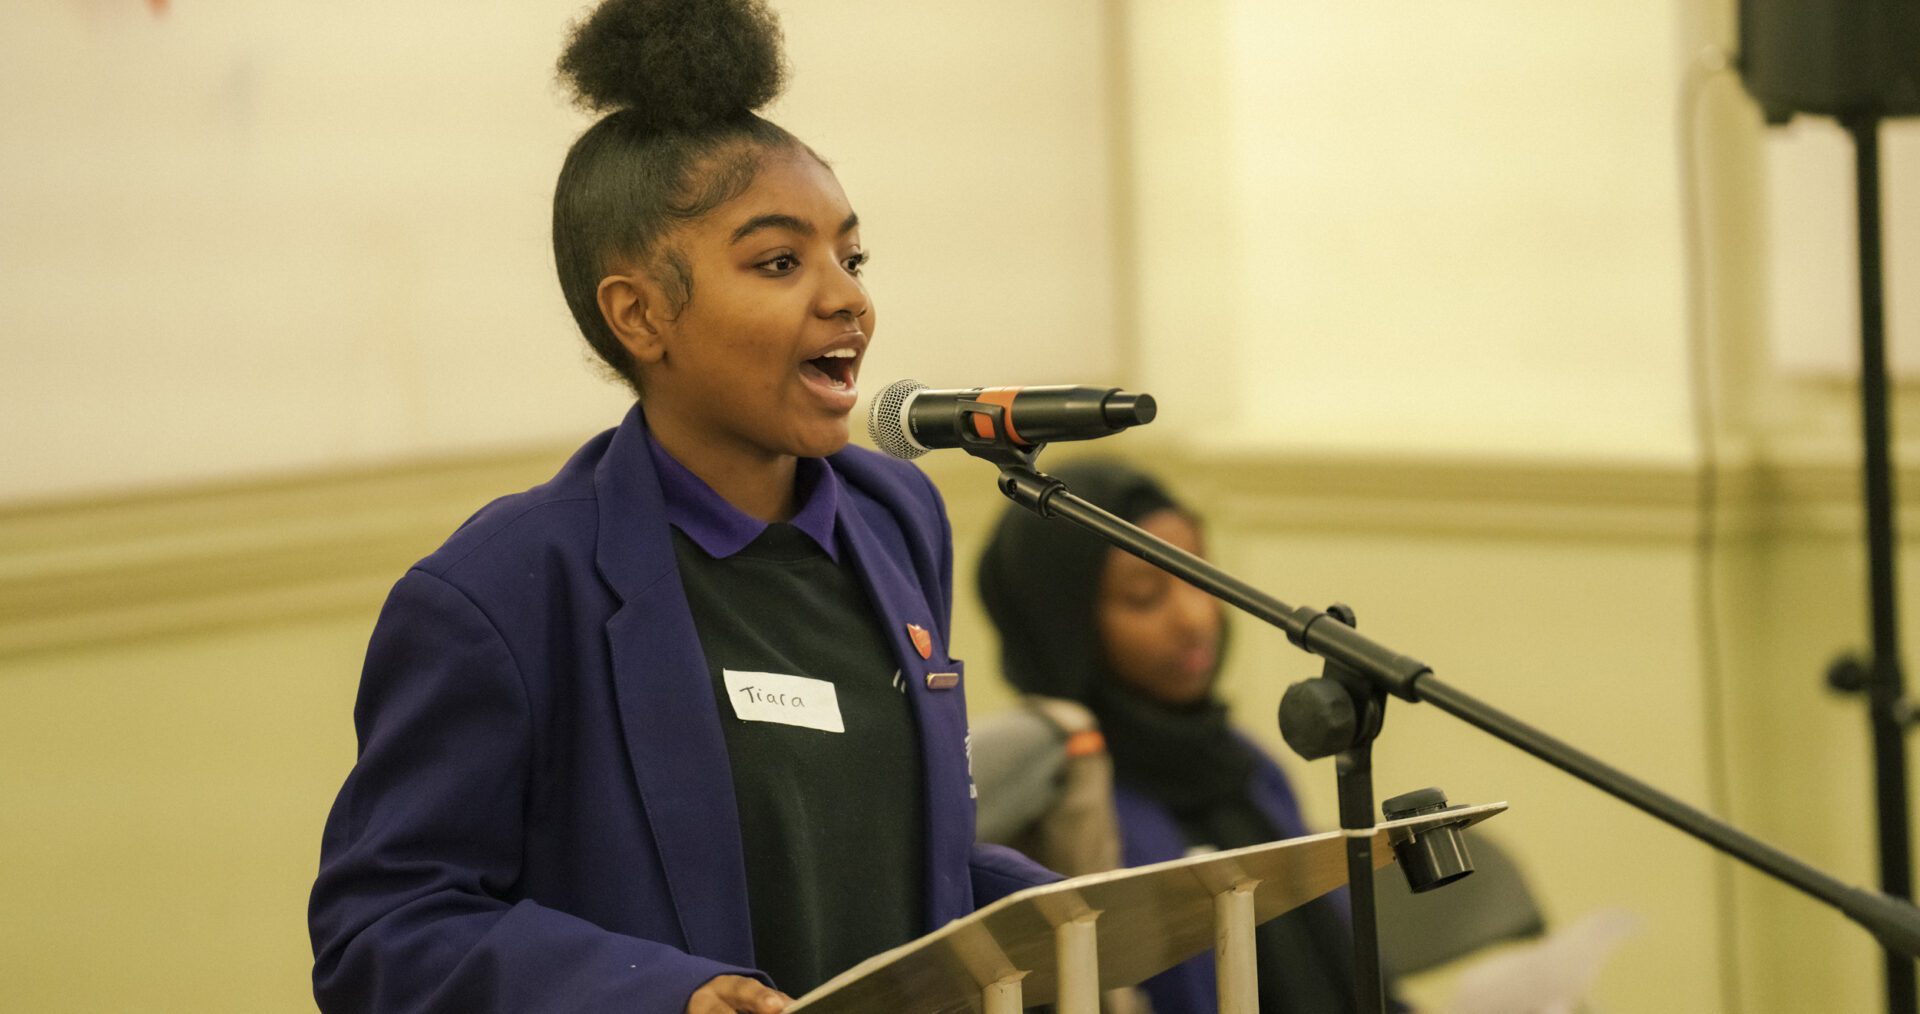 A teen girl with dark hair in a large afro bun on top of her head, wearing a purple blazer, speaks animatedly to the crowd ahead of the lectern she stands in front of